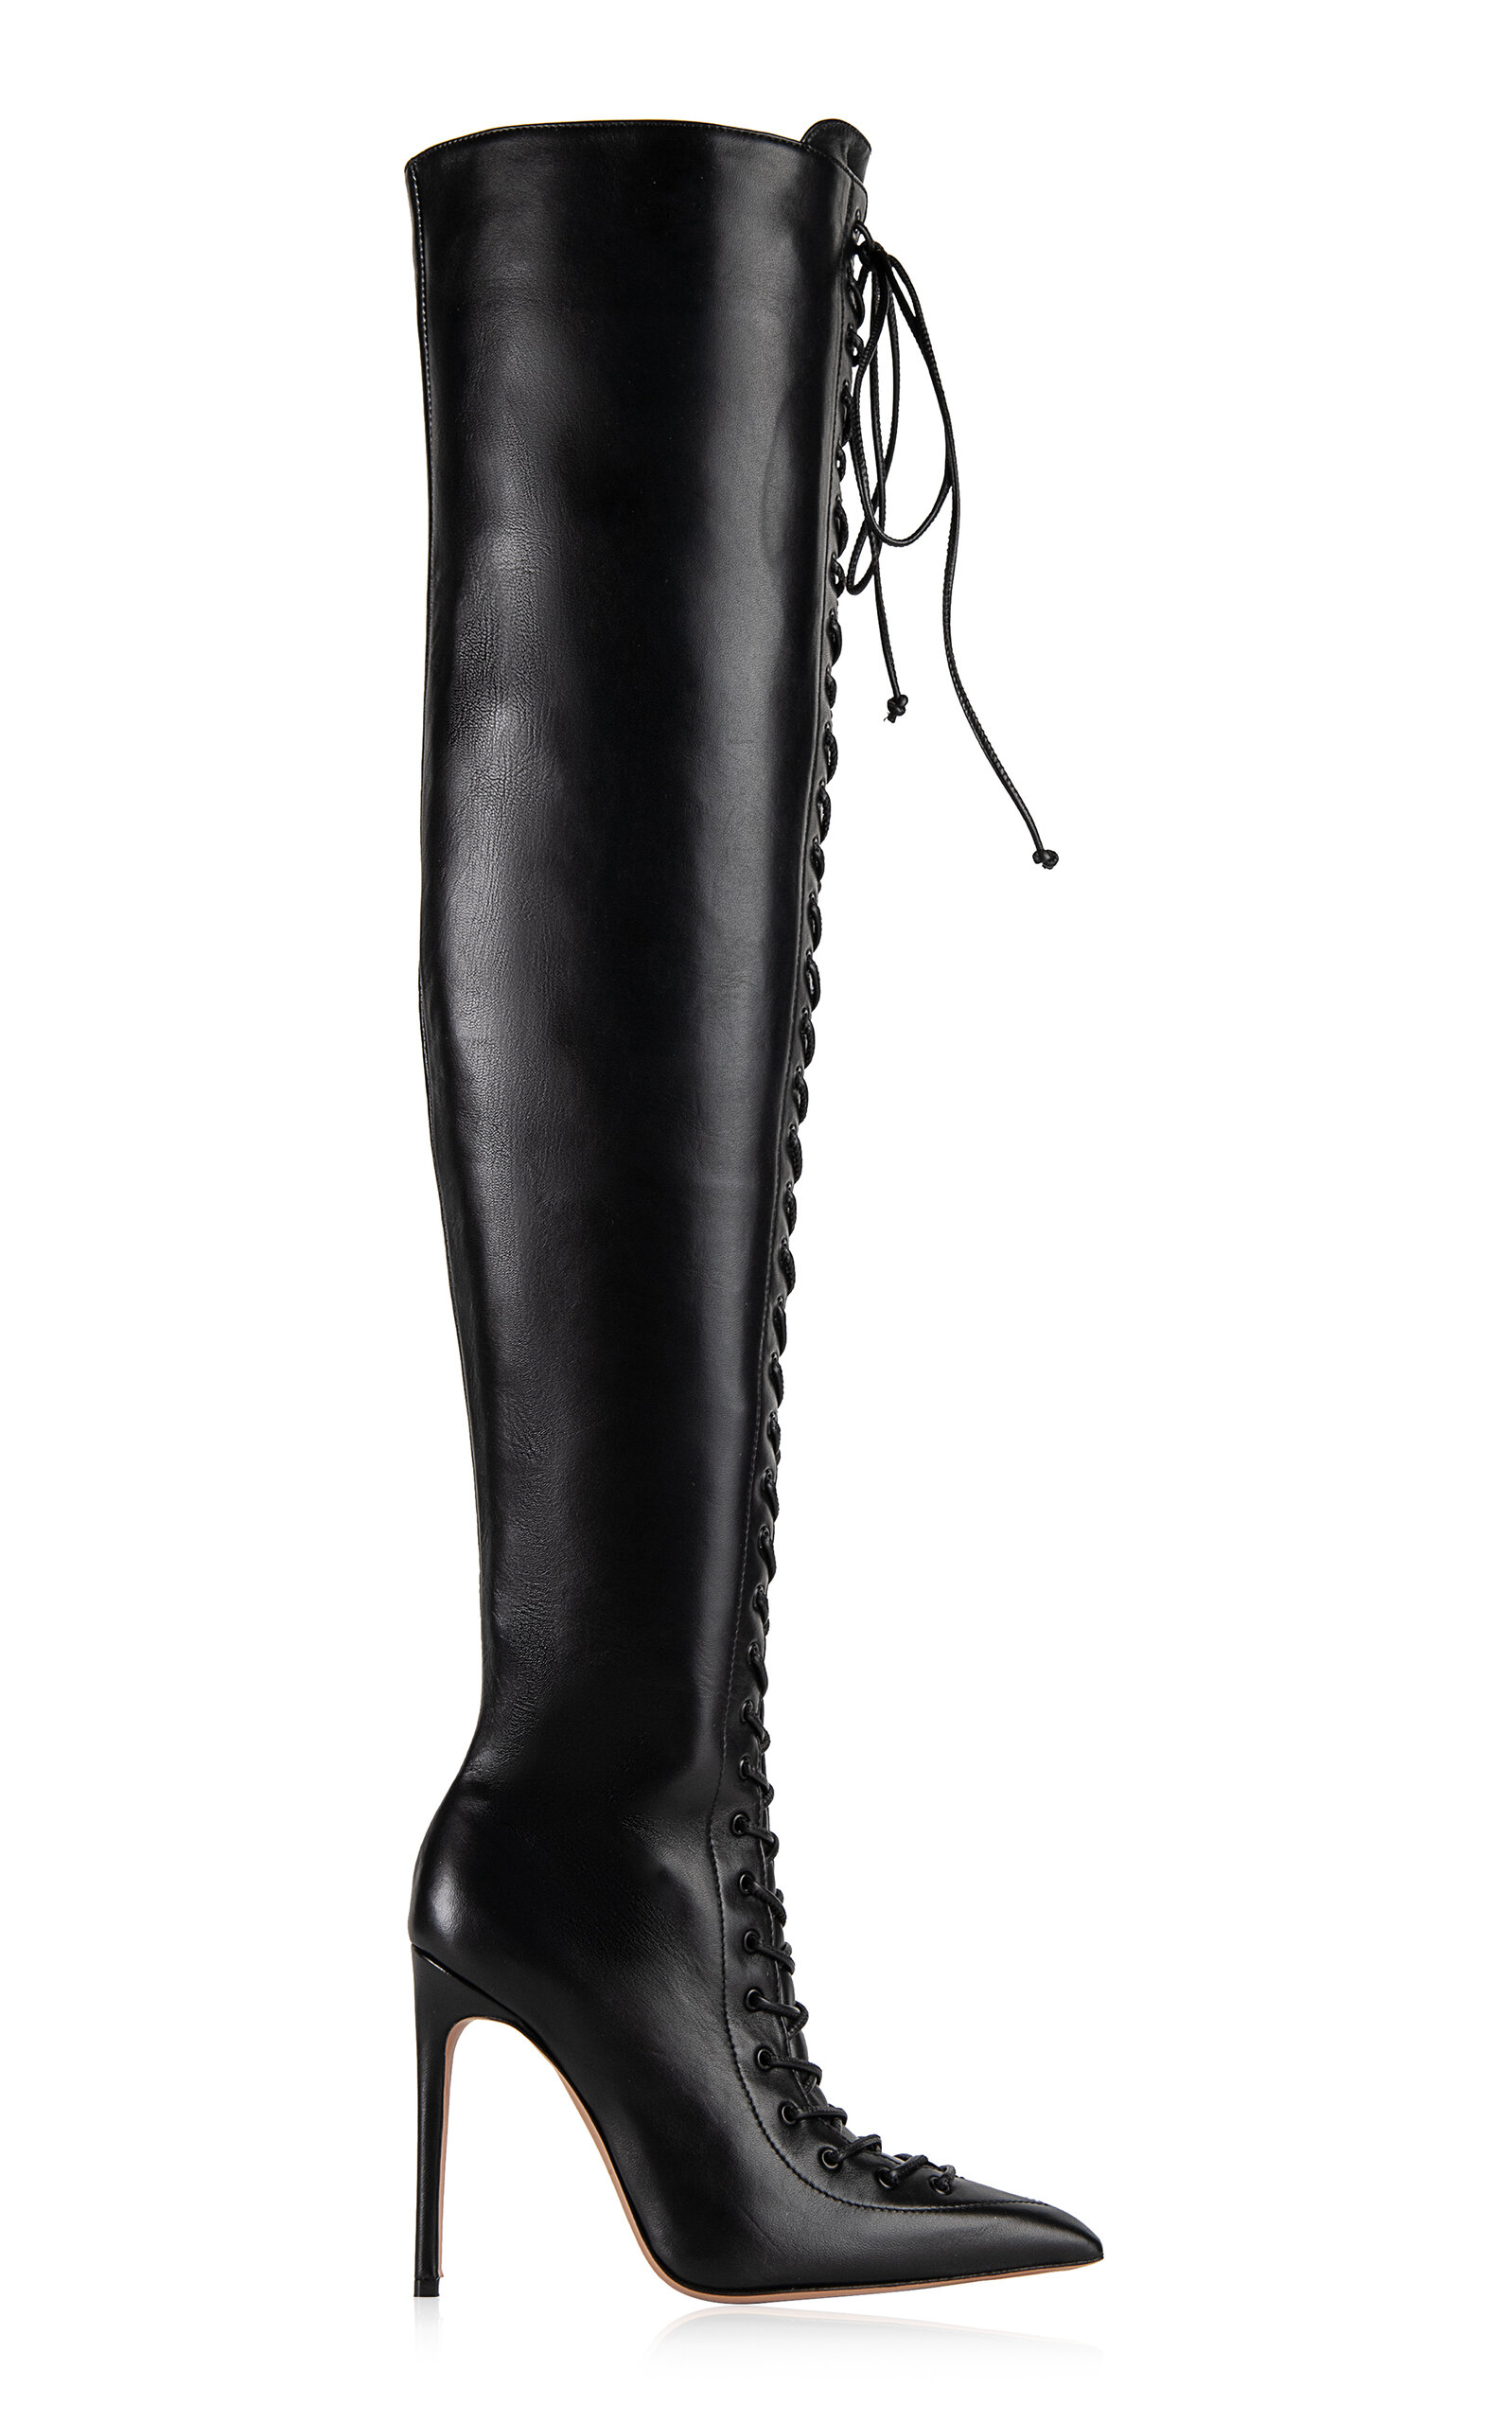 The New Arrivals Ilkyaz Ozel Over The Knee Corset Leather Boots In Black